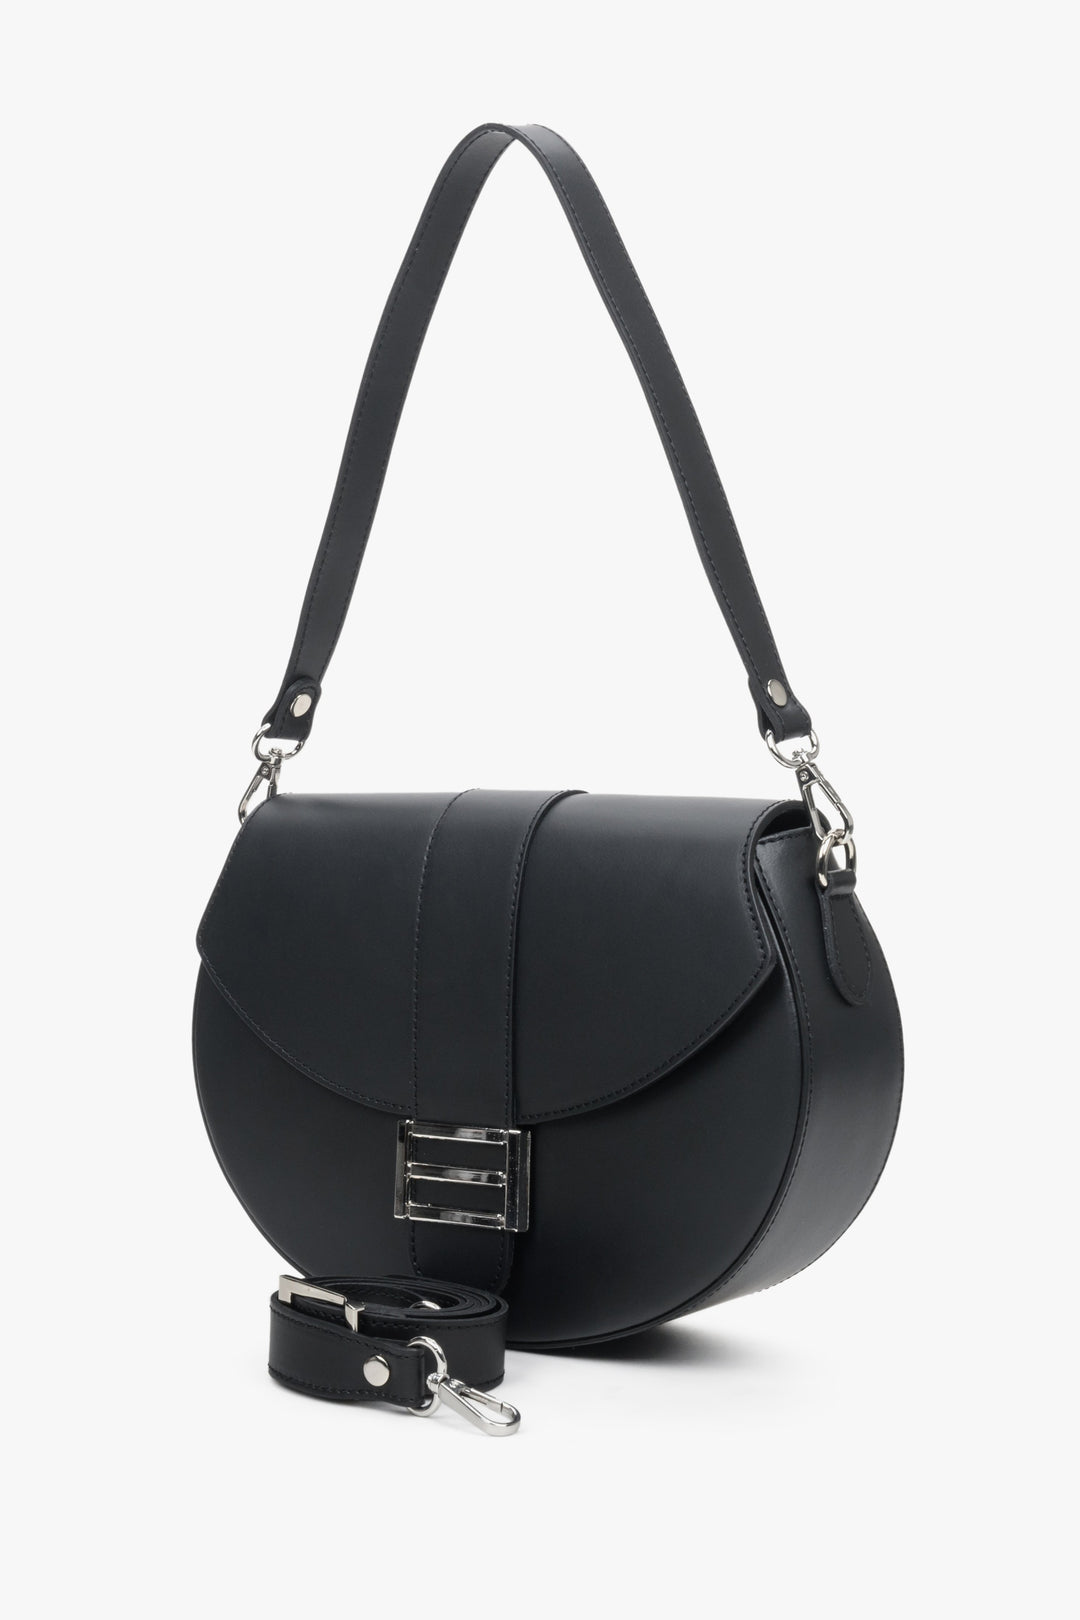 Women's black leather handbag with two adjustable straps by Estro - model presentation with a short handle.